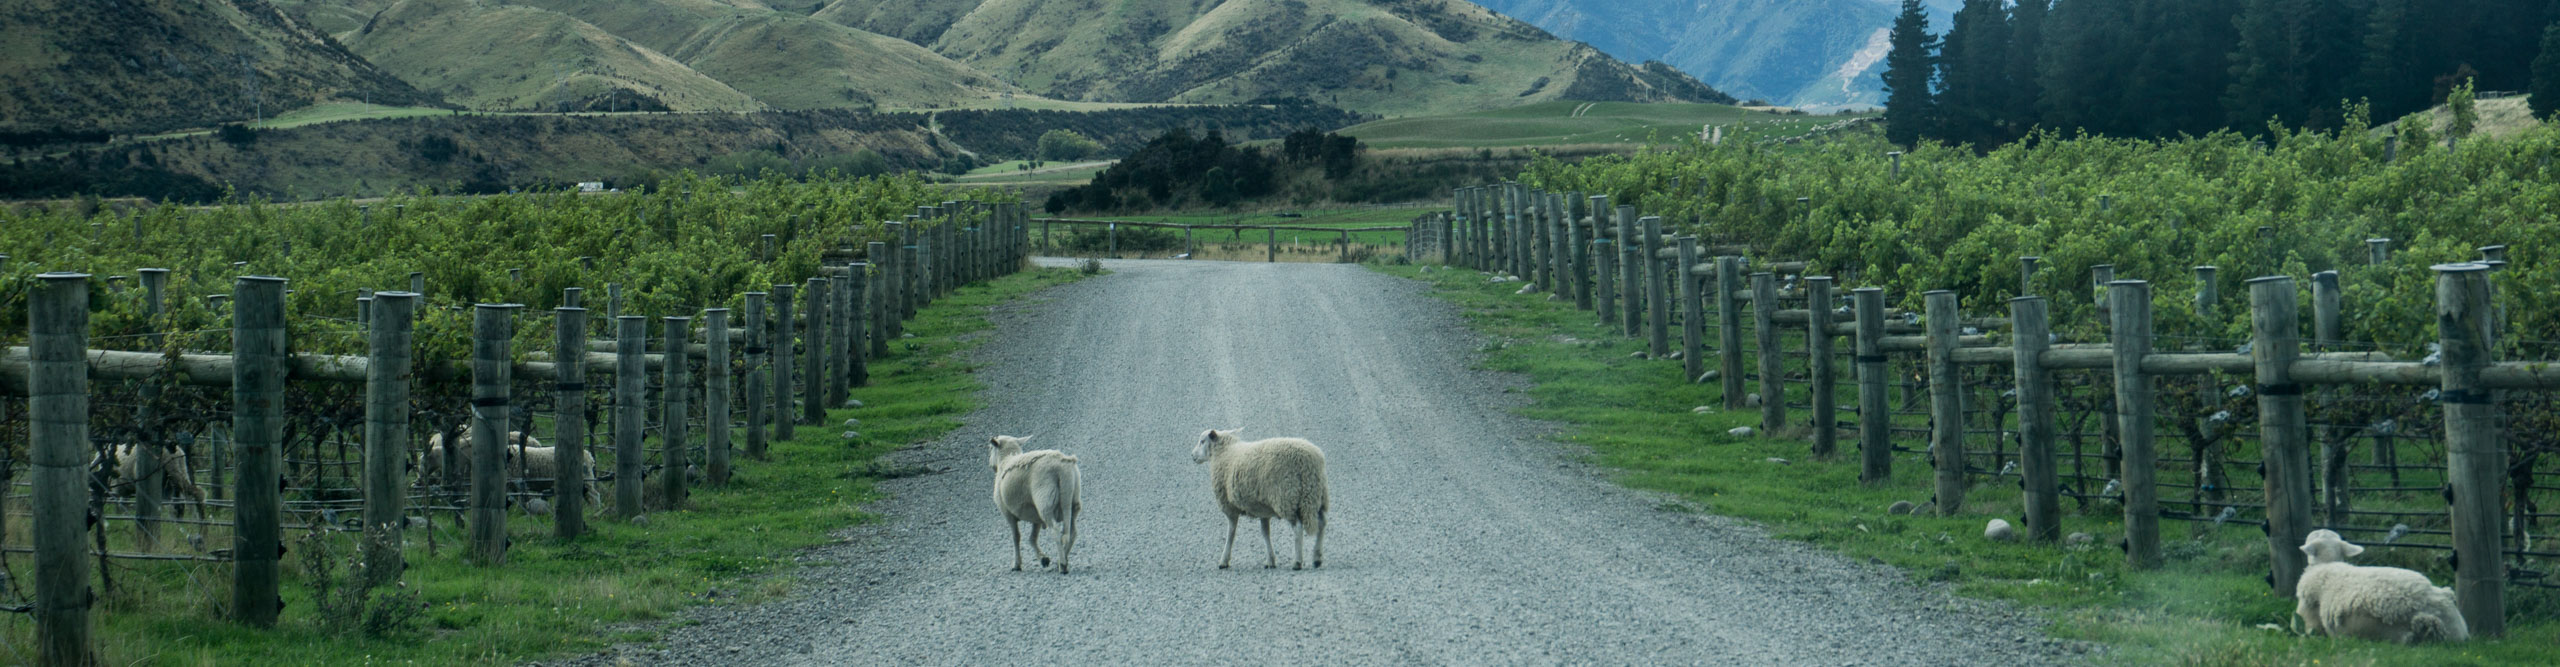 Sheep crossing the road in a vineyard in New Zealand's South island 